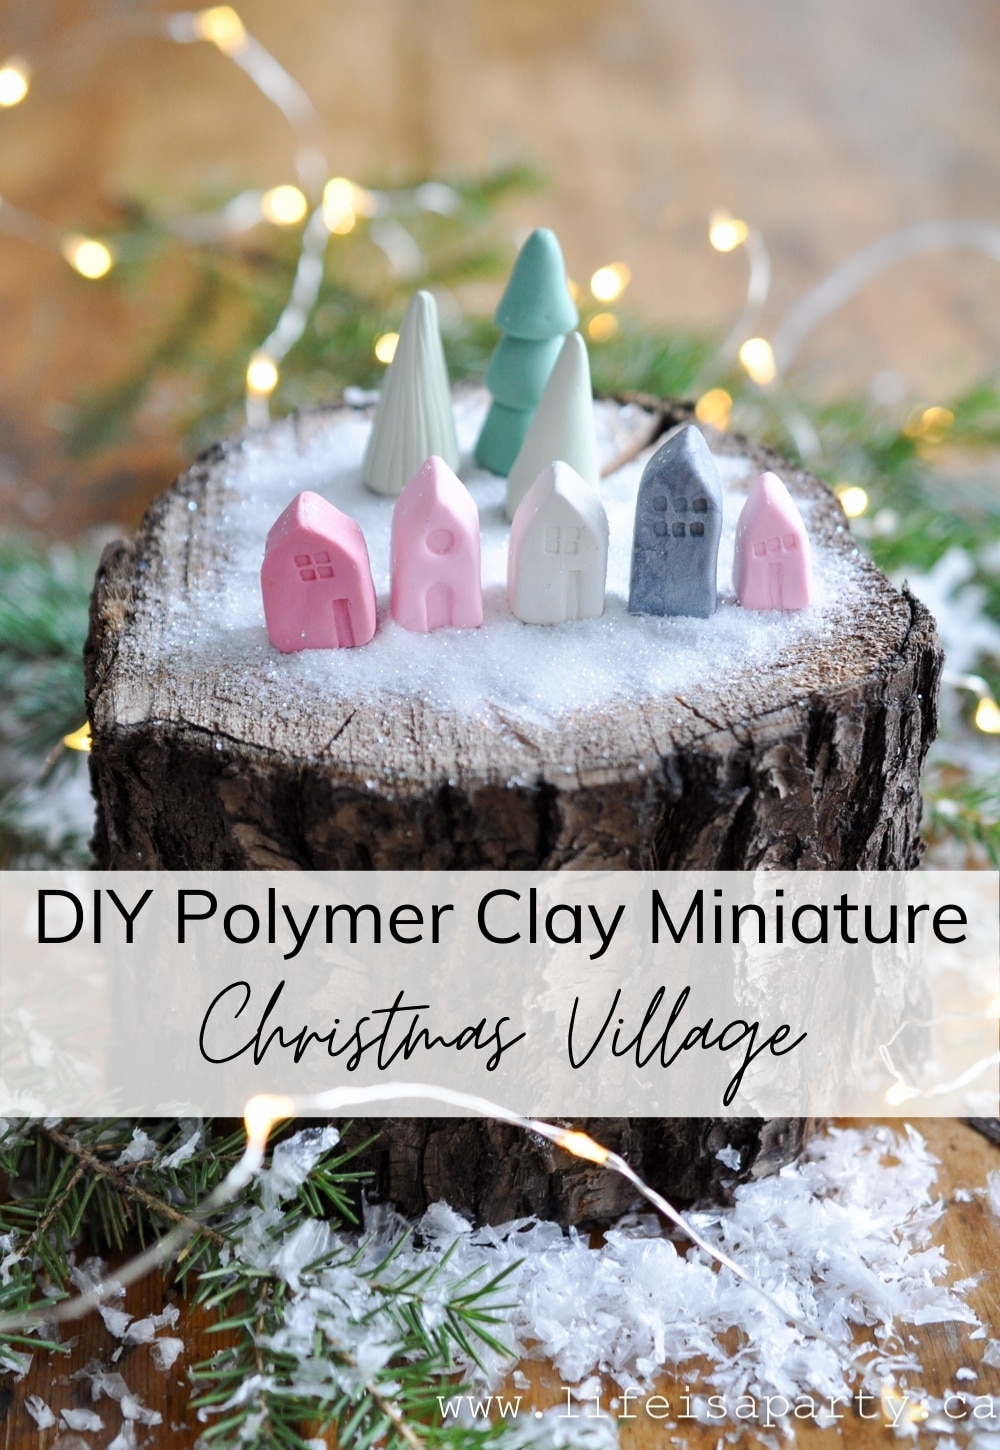 Polymer Clay Christmas Village: DIY miniature polymer clay houses and trees make a decorative miniture Christmas village.